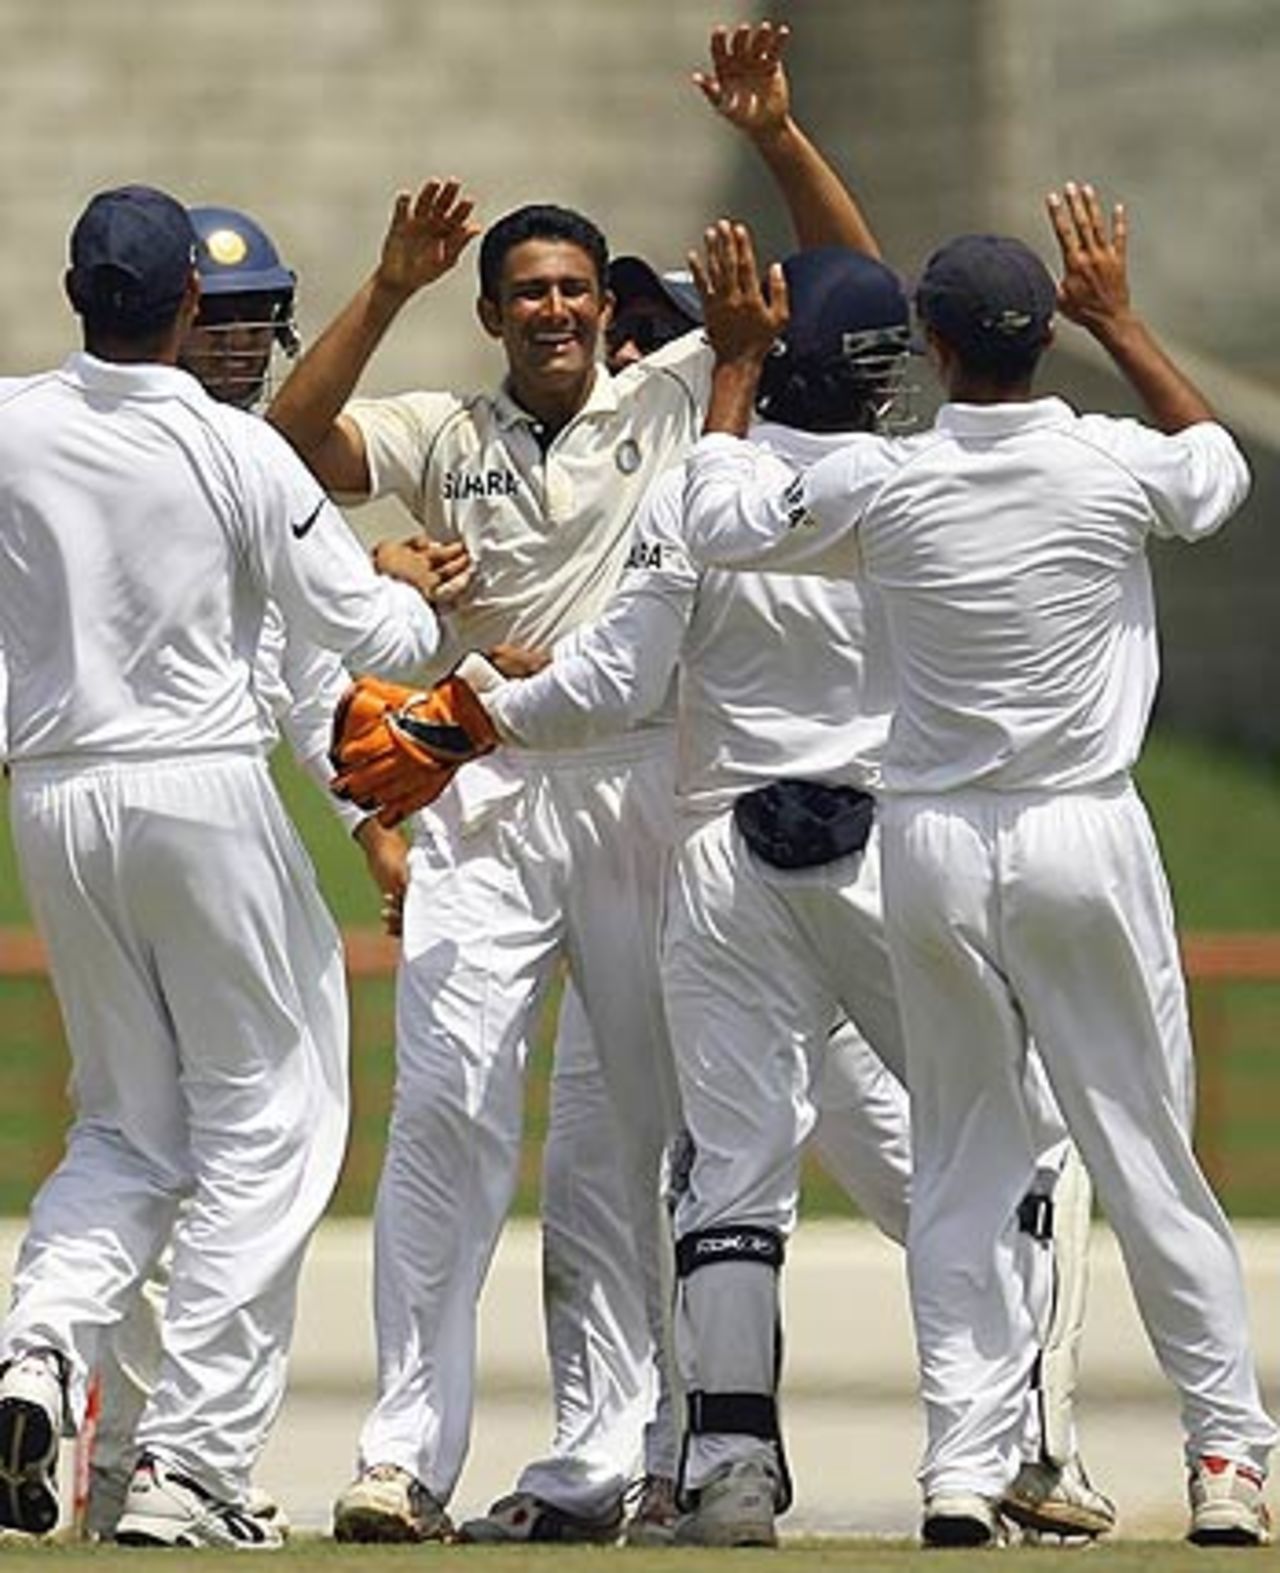 Anil Kumble can't believe his luck after dismissing Shivnarine Chanderpaul with a full toss, West Indies v India, 2nd Test, St Lucia, 5th day, June 14, 2006